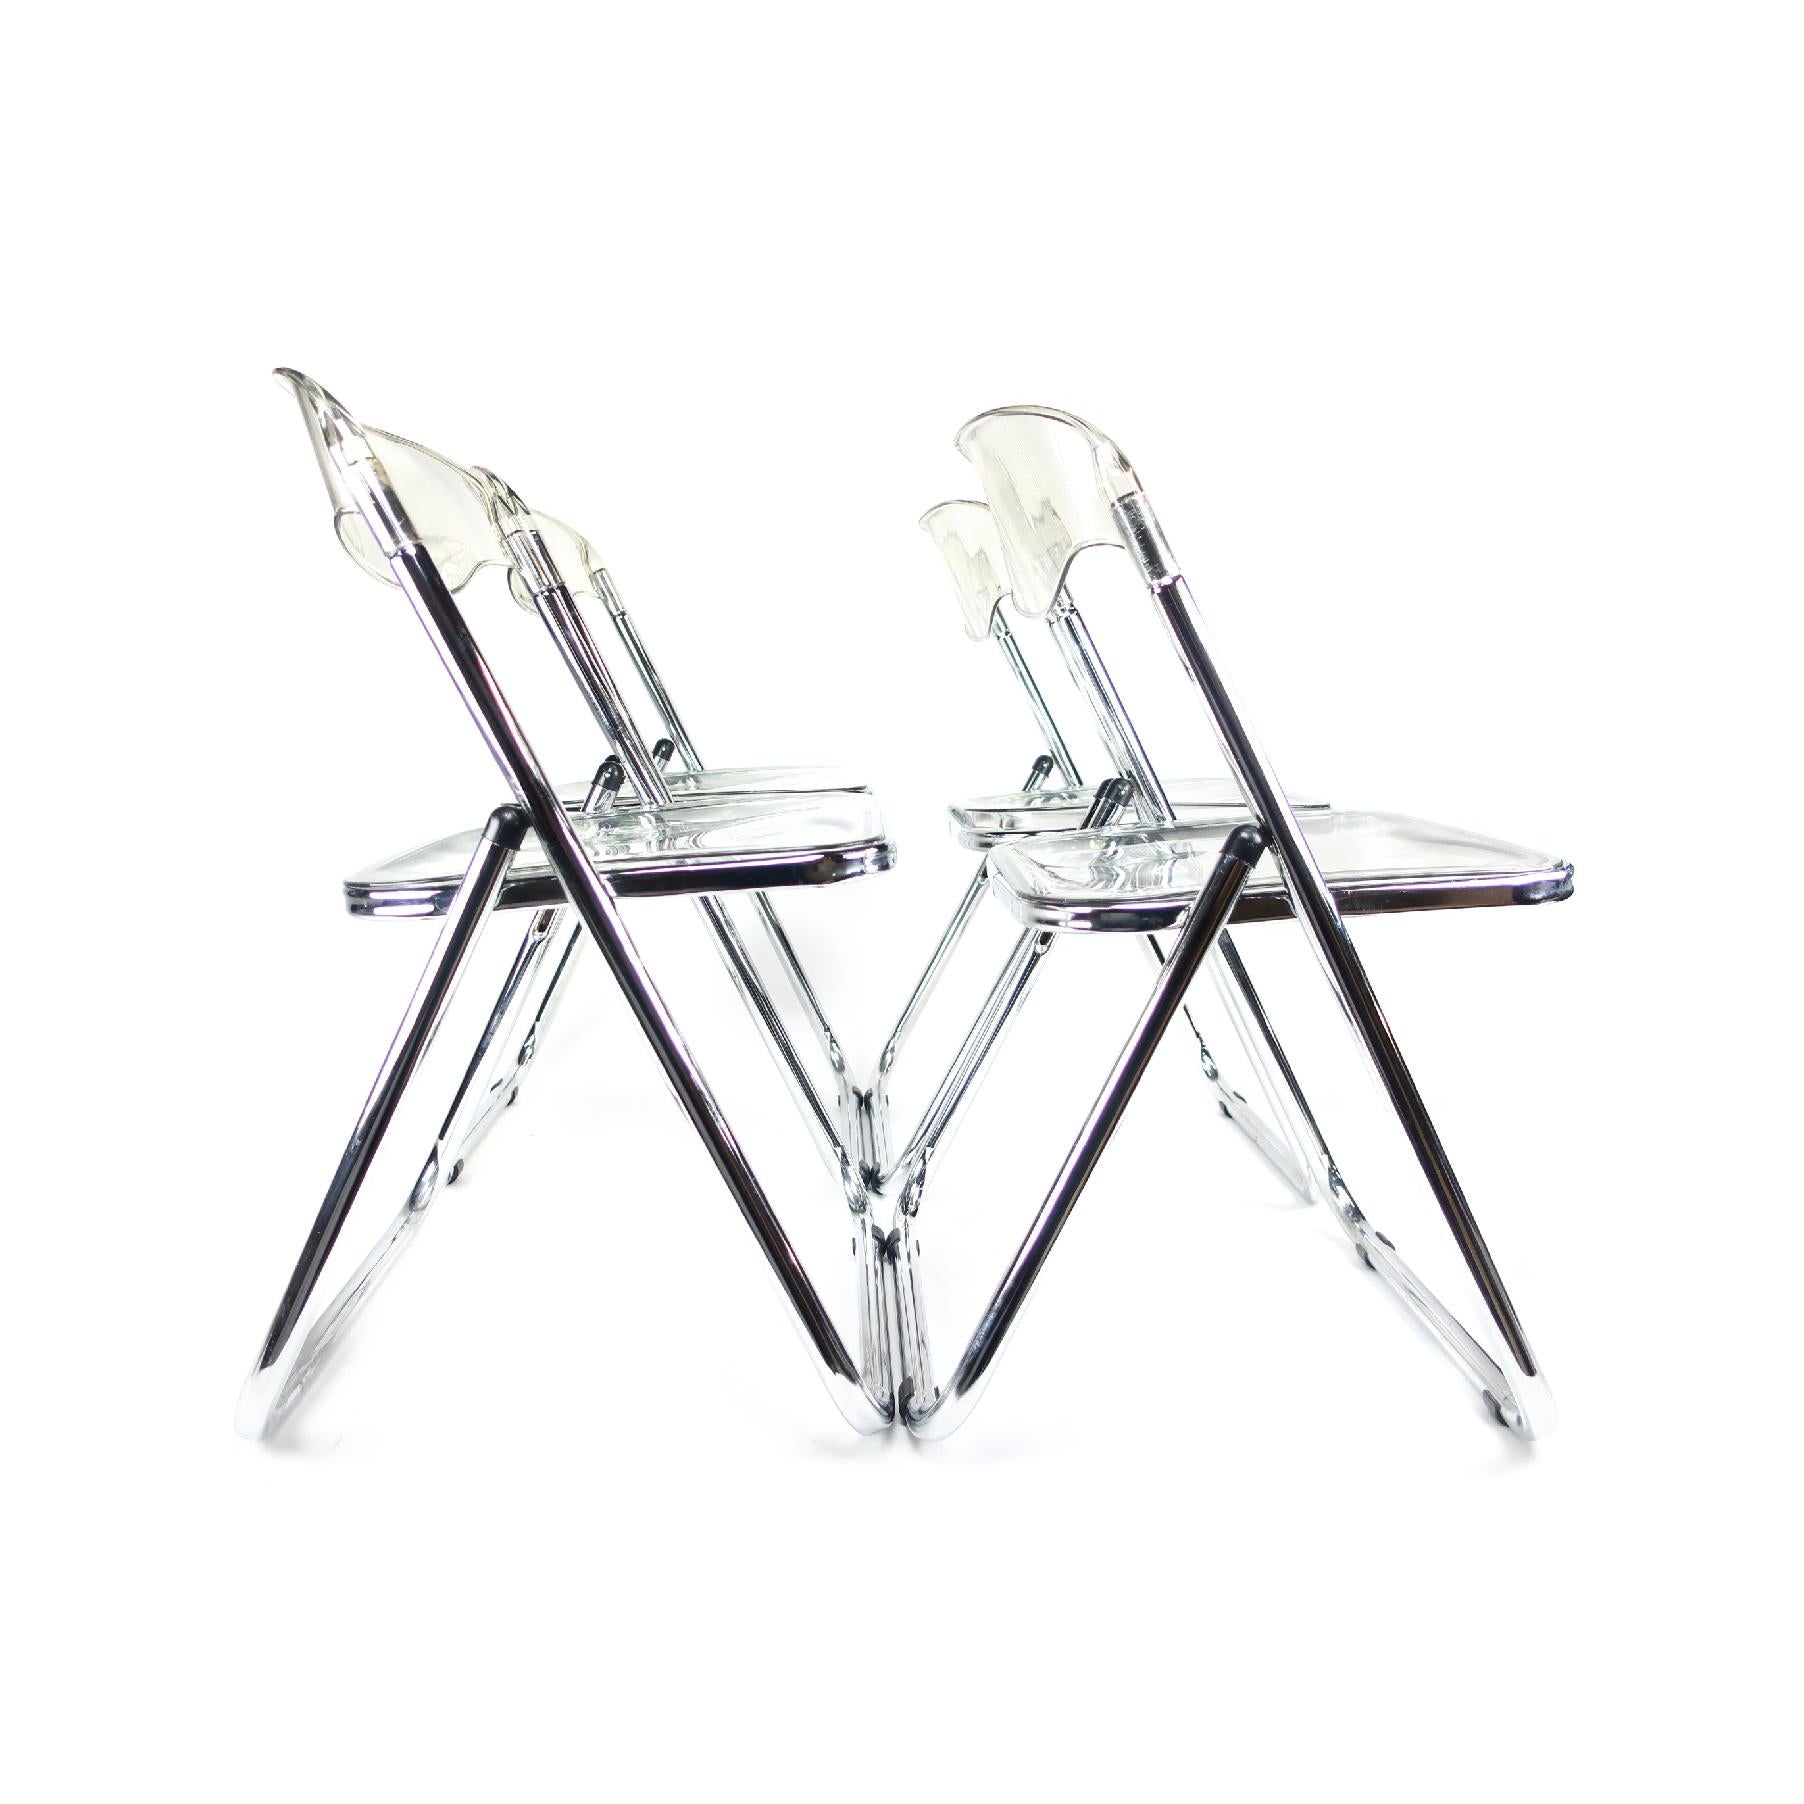 Midcentury Italian modern Lucite and chrome, set of 4

A very cool set of four Mid-Century Modern chrome and Lucite folding chairs in nice condition. No cracks or discoloration of the Lucite, with a minimum of age appropriate wear. Well cared for